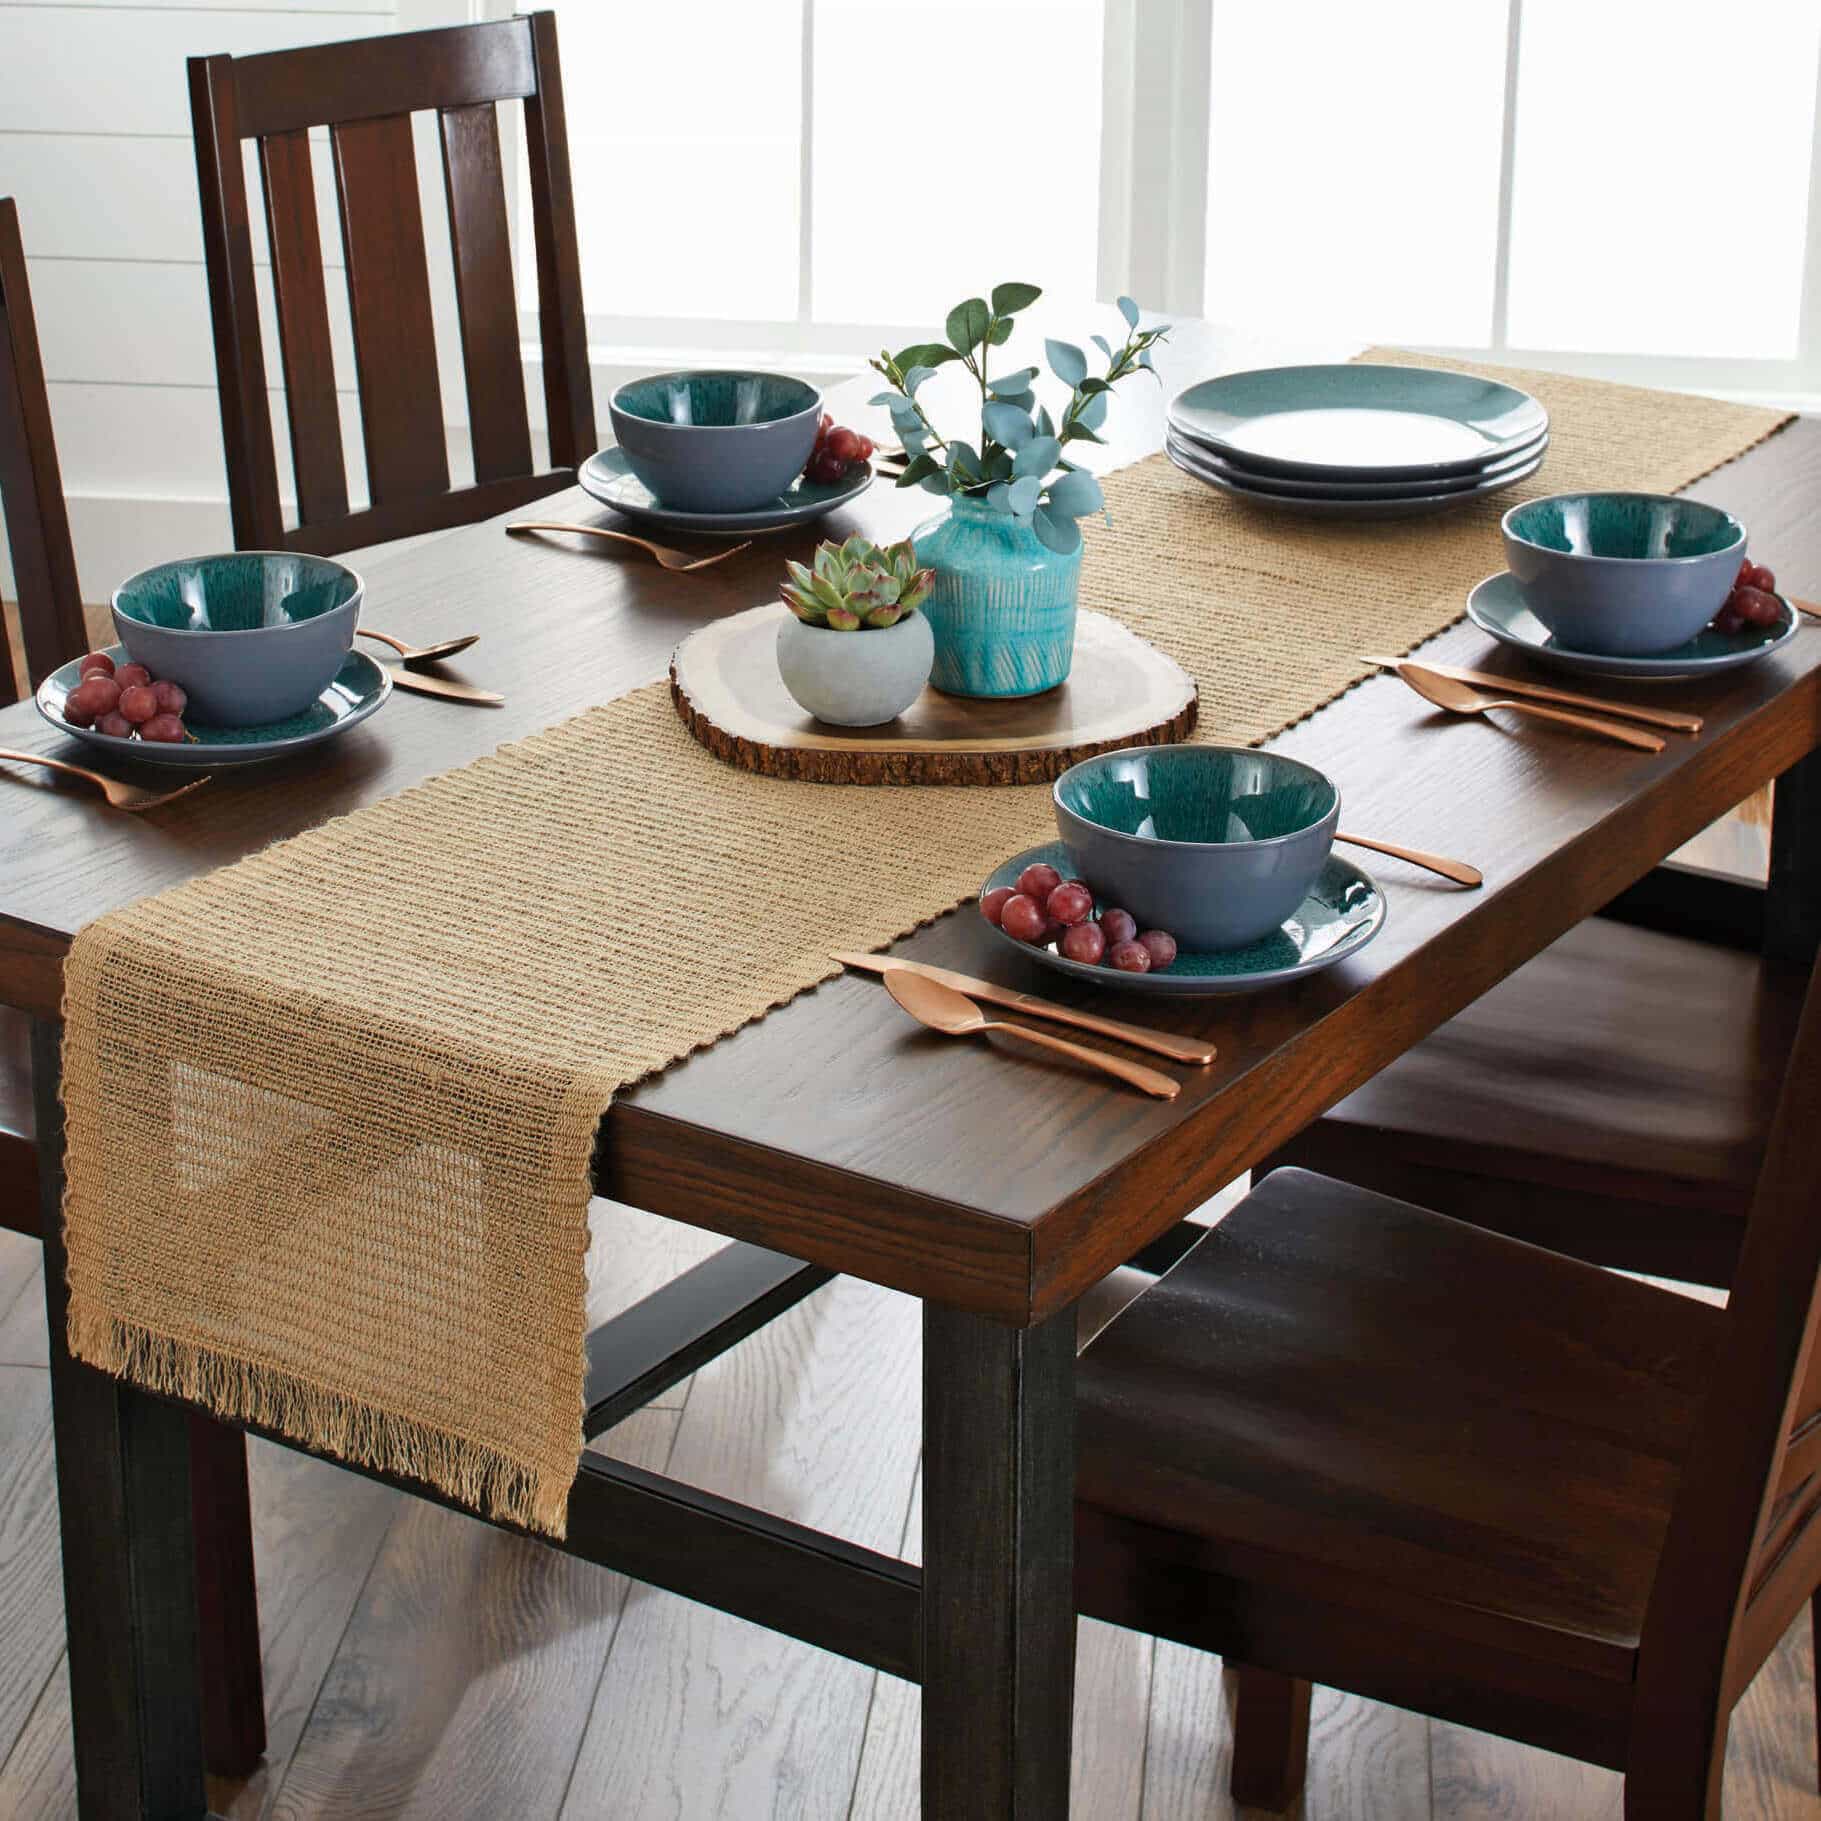 Attractive and Modern Dining Table Runner Design Ideas